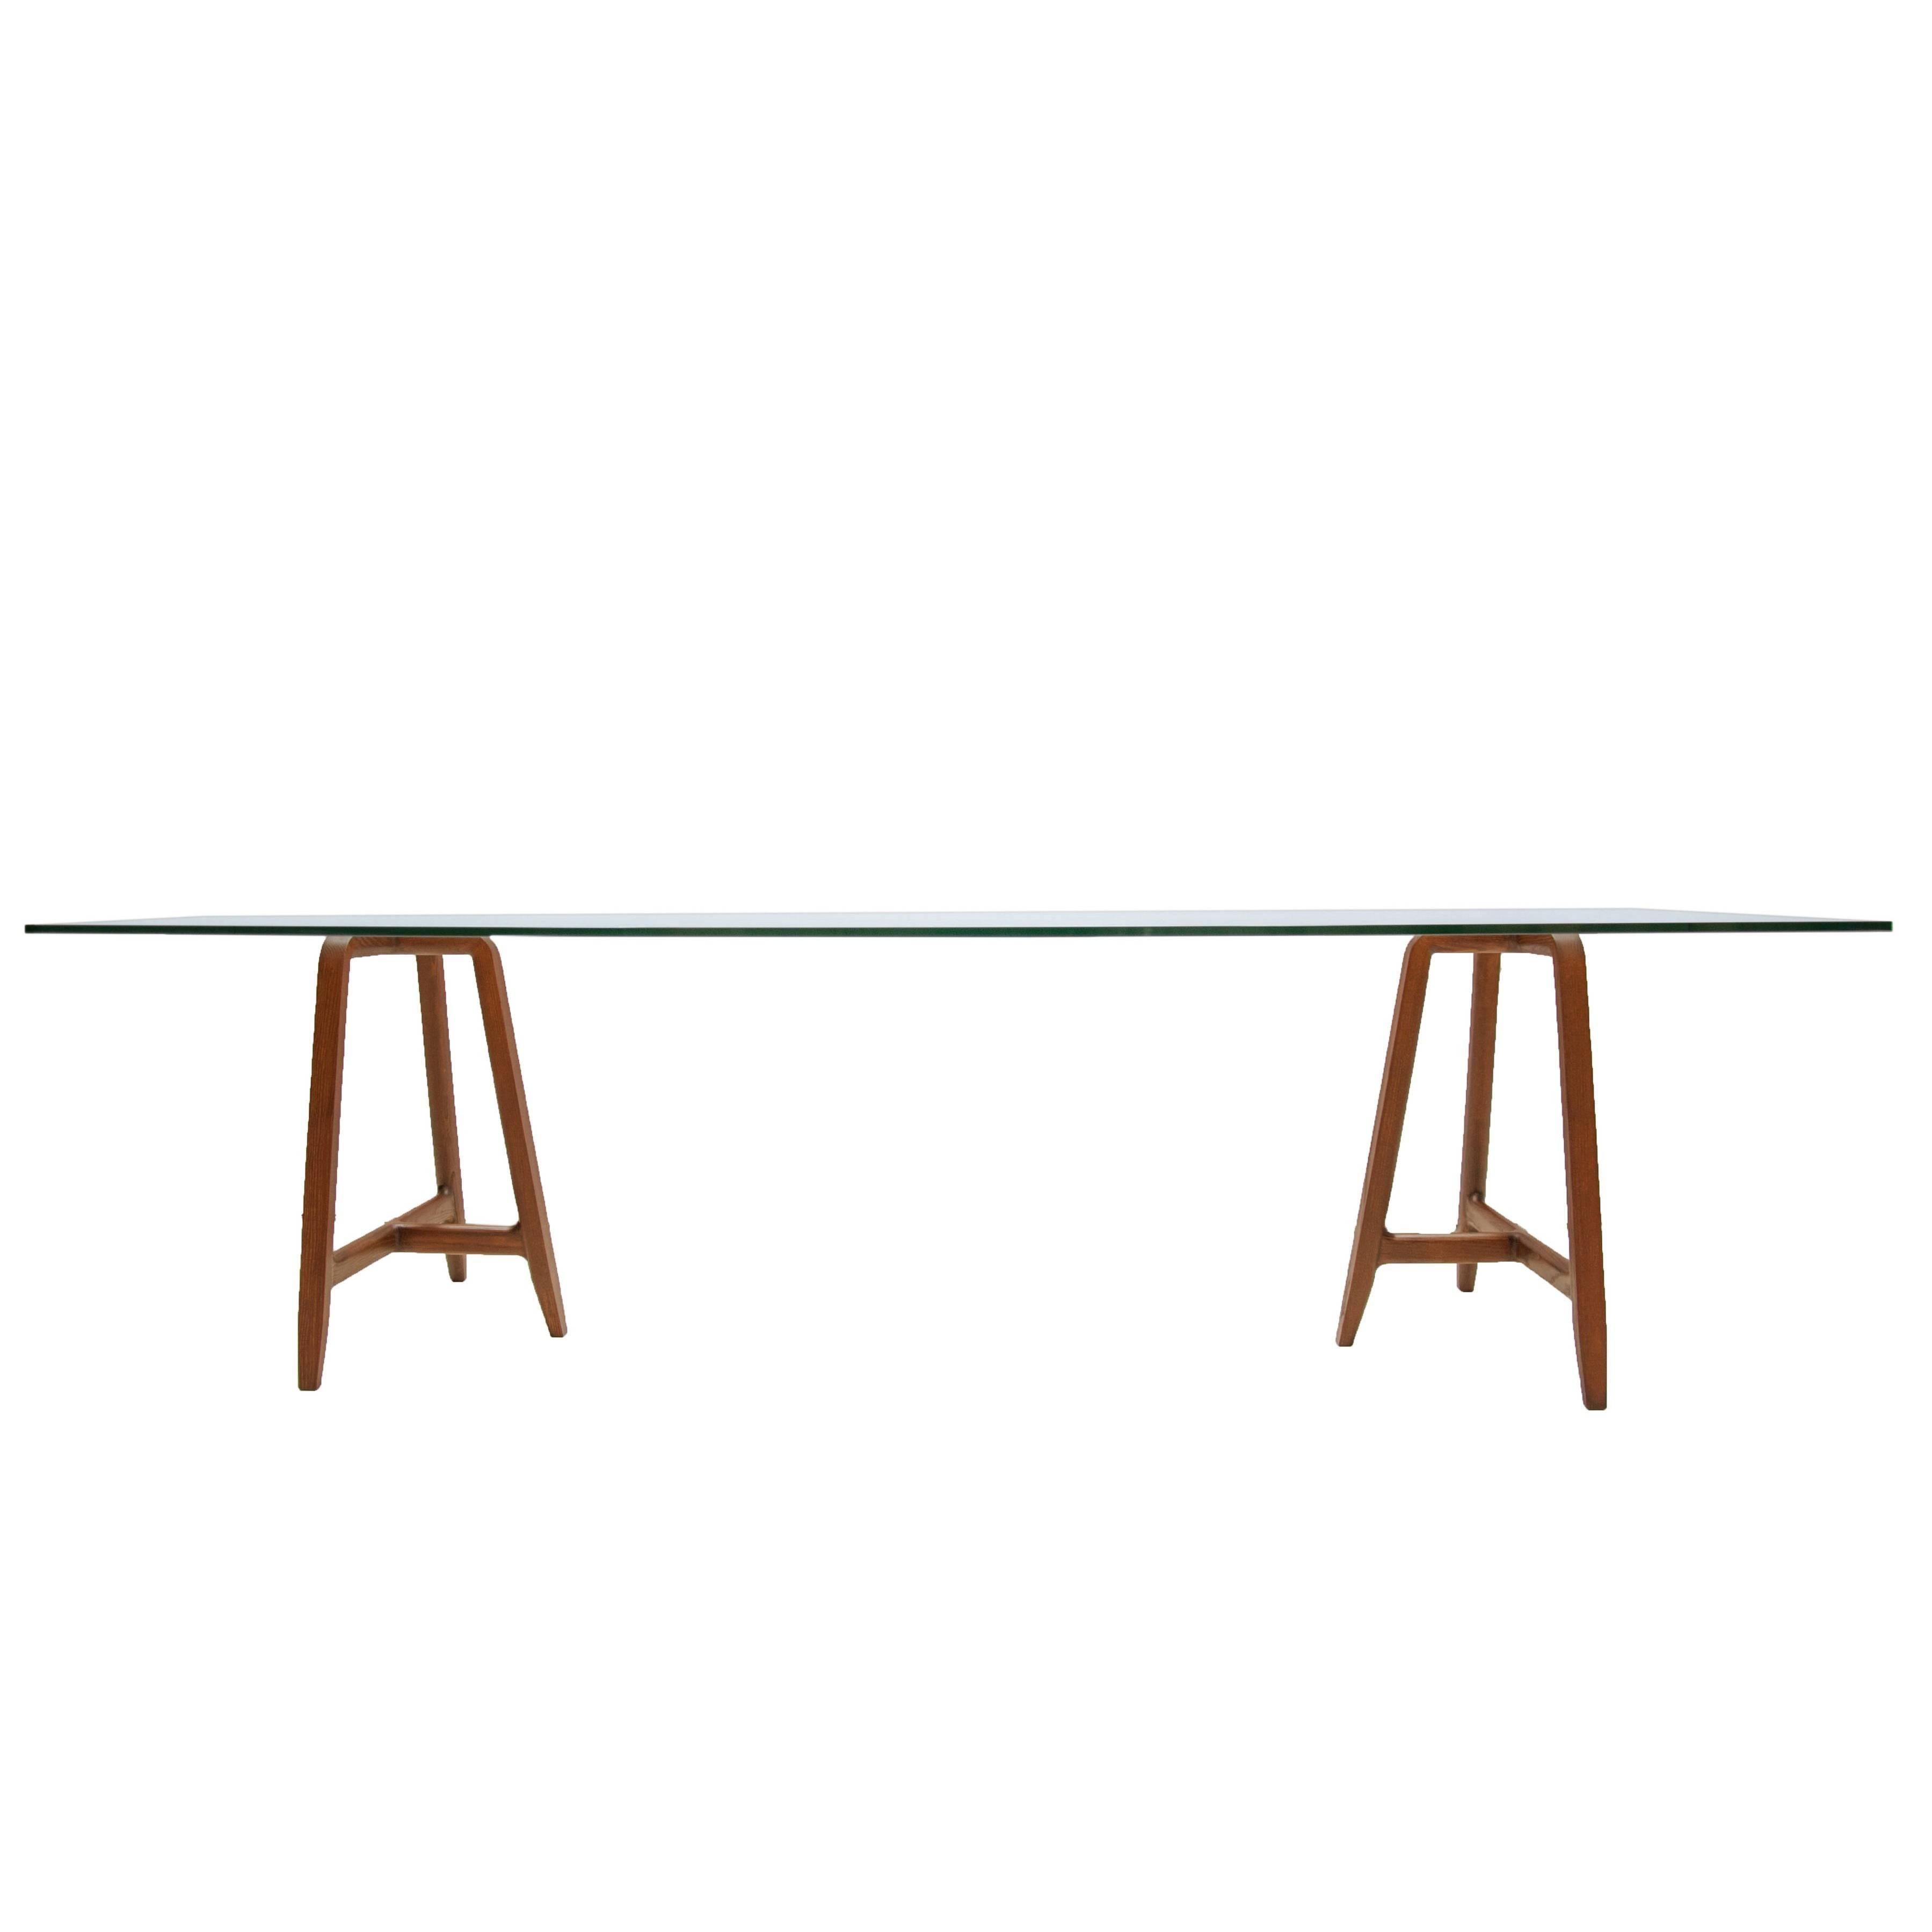 "Easel" Tempered Glass Top and Walnut Base Table by L. and R. Palomba for Driade